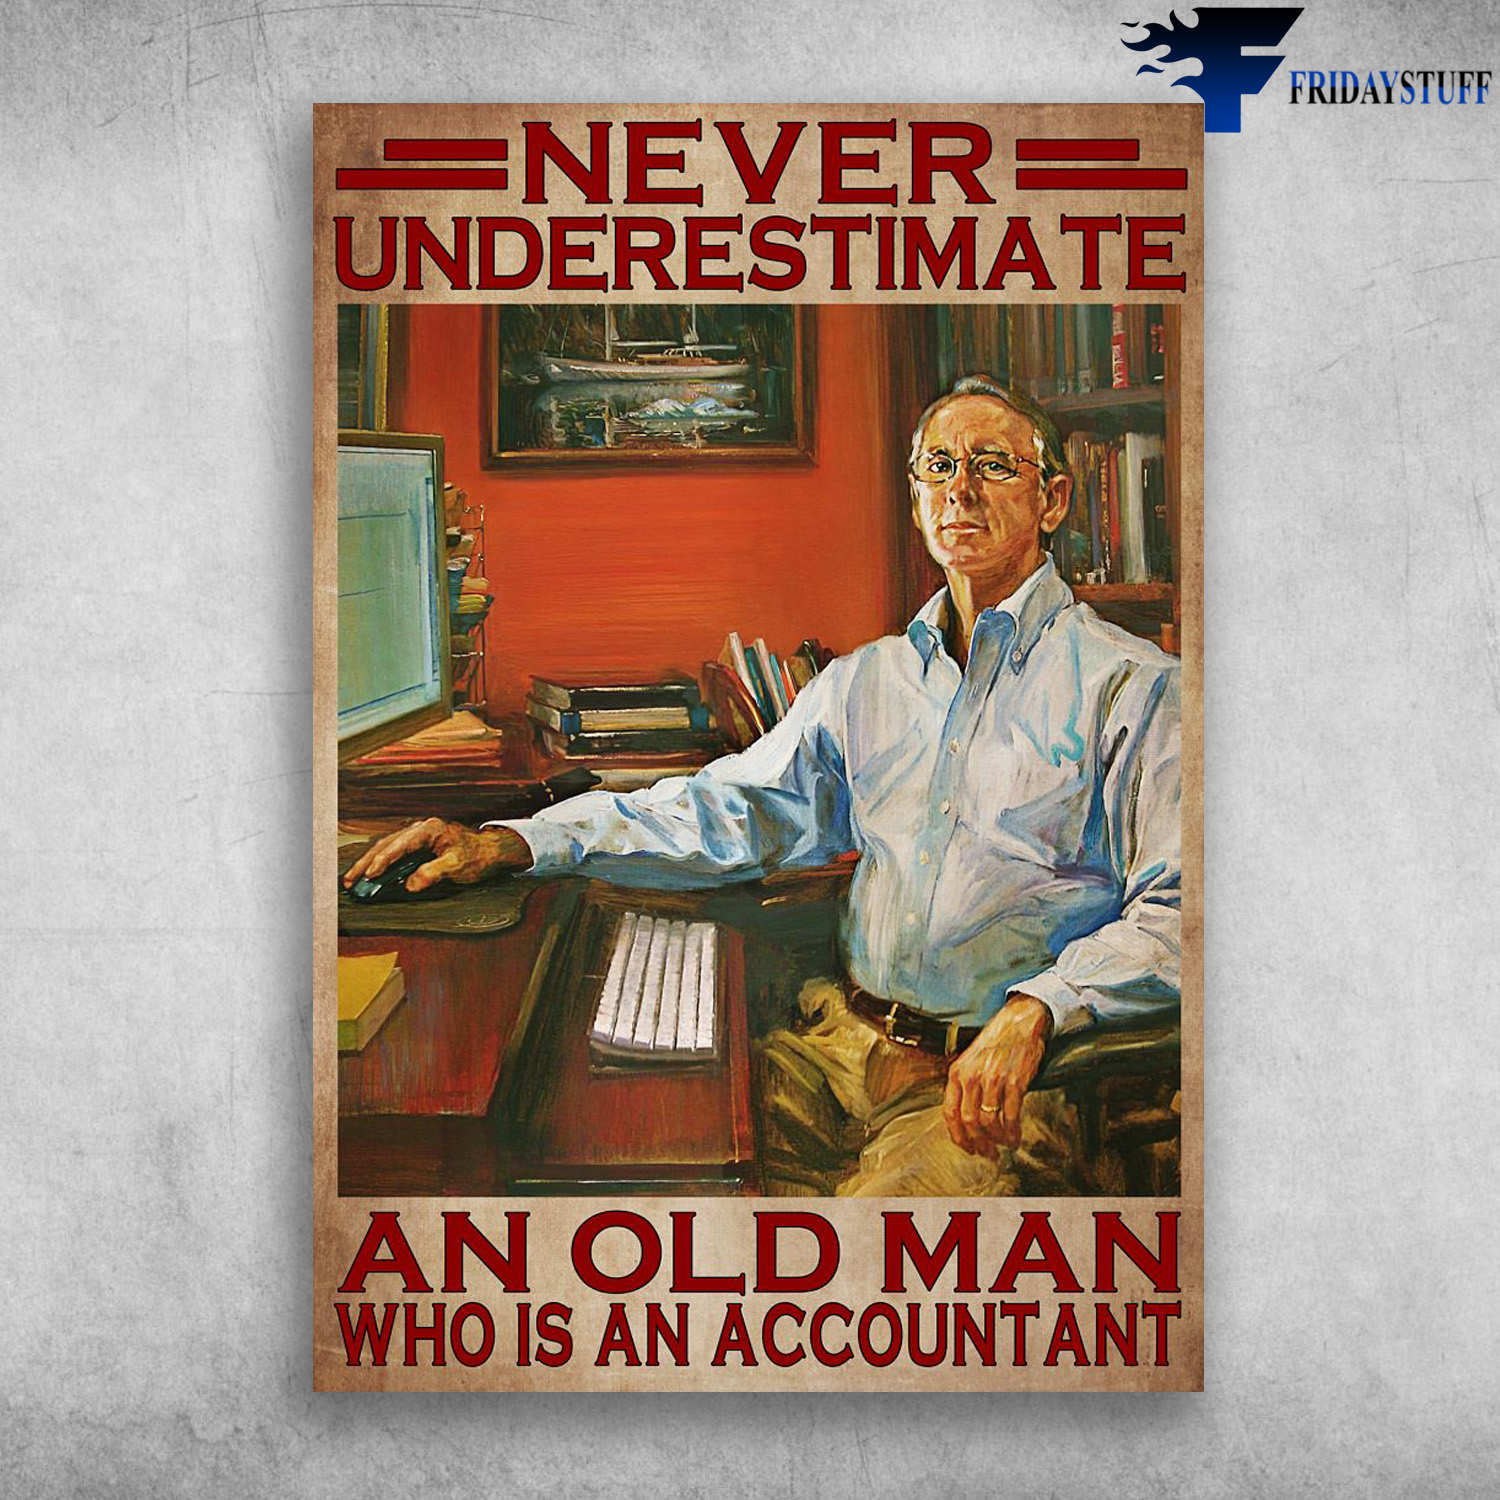 Old Man Accounting - Never Underestimate, An Old Man, Who Is An Accountant